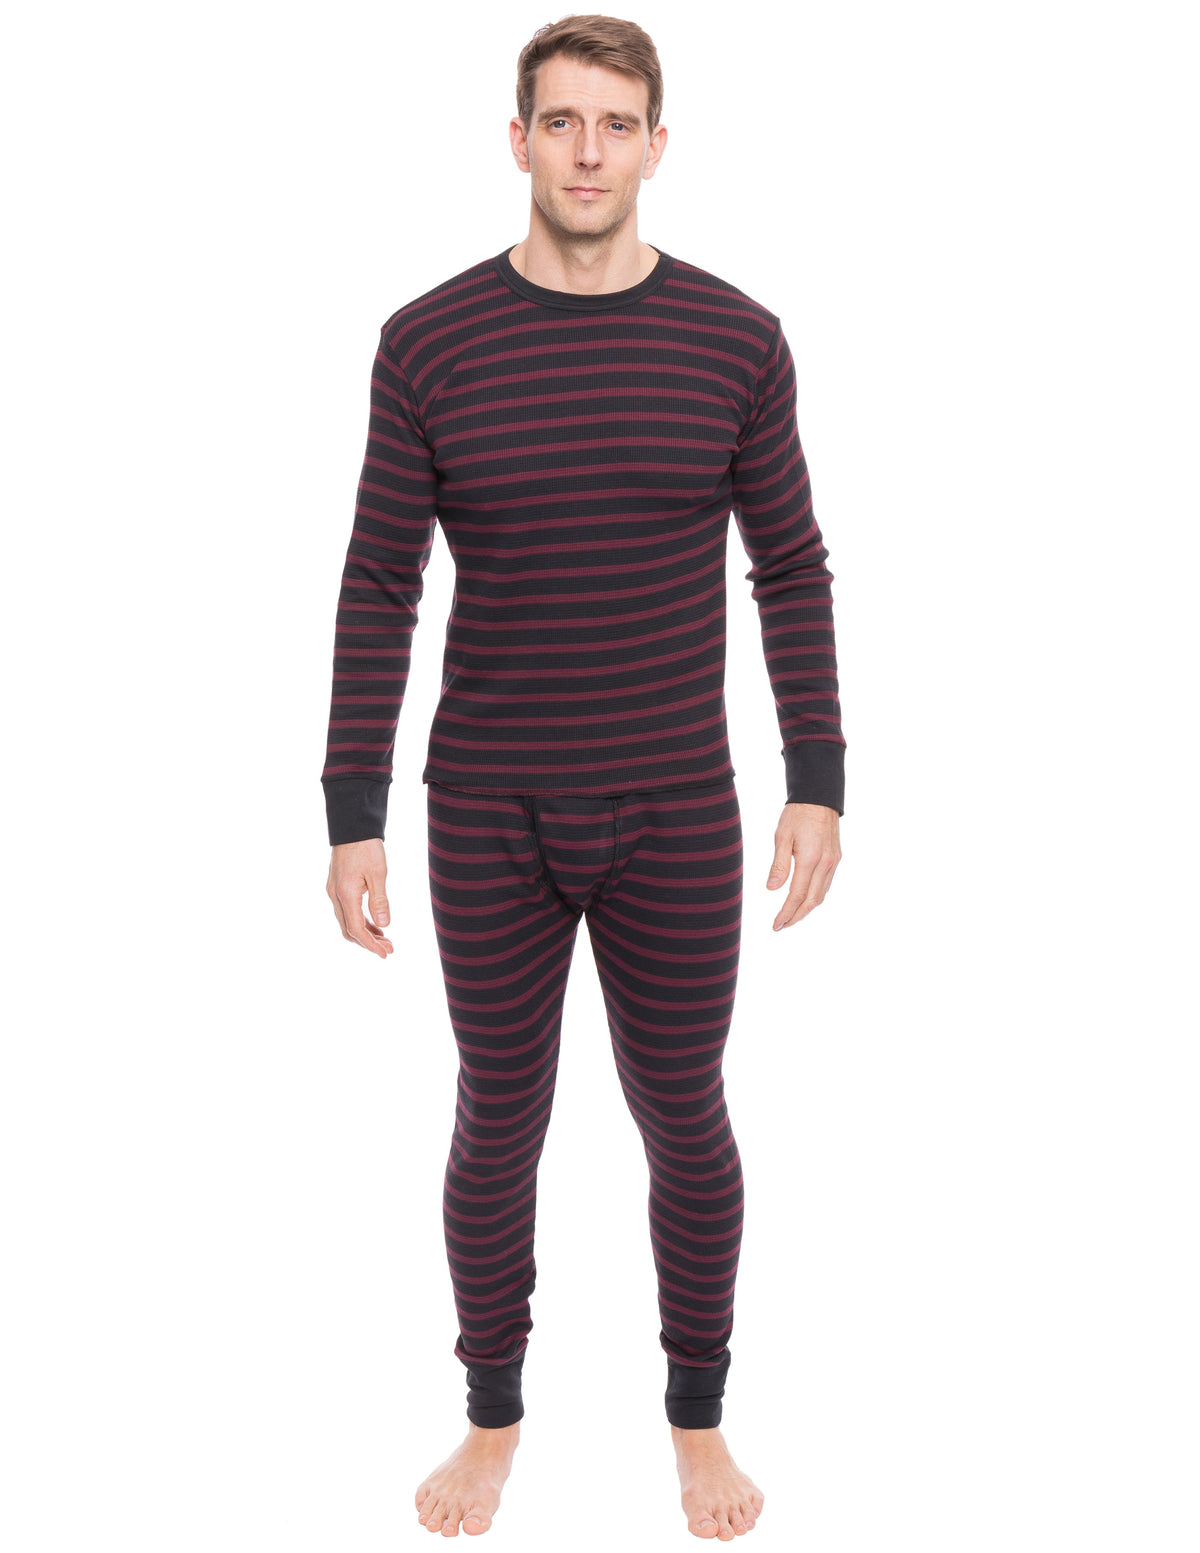 Men's Extreme Cold Waffle Knit Thermal Top and Bottom Set - Stripes Black/Fig